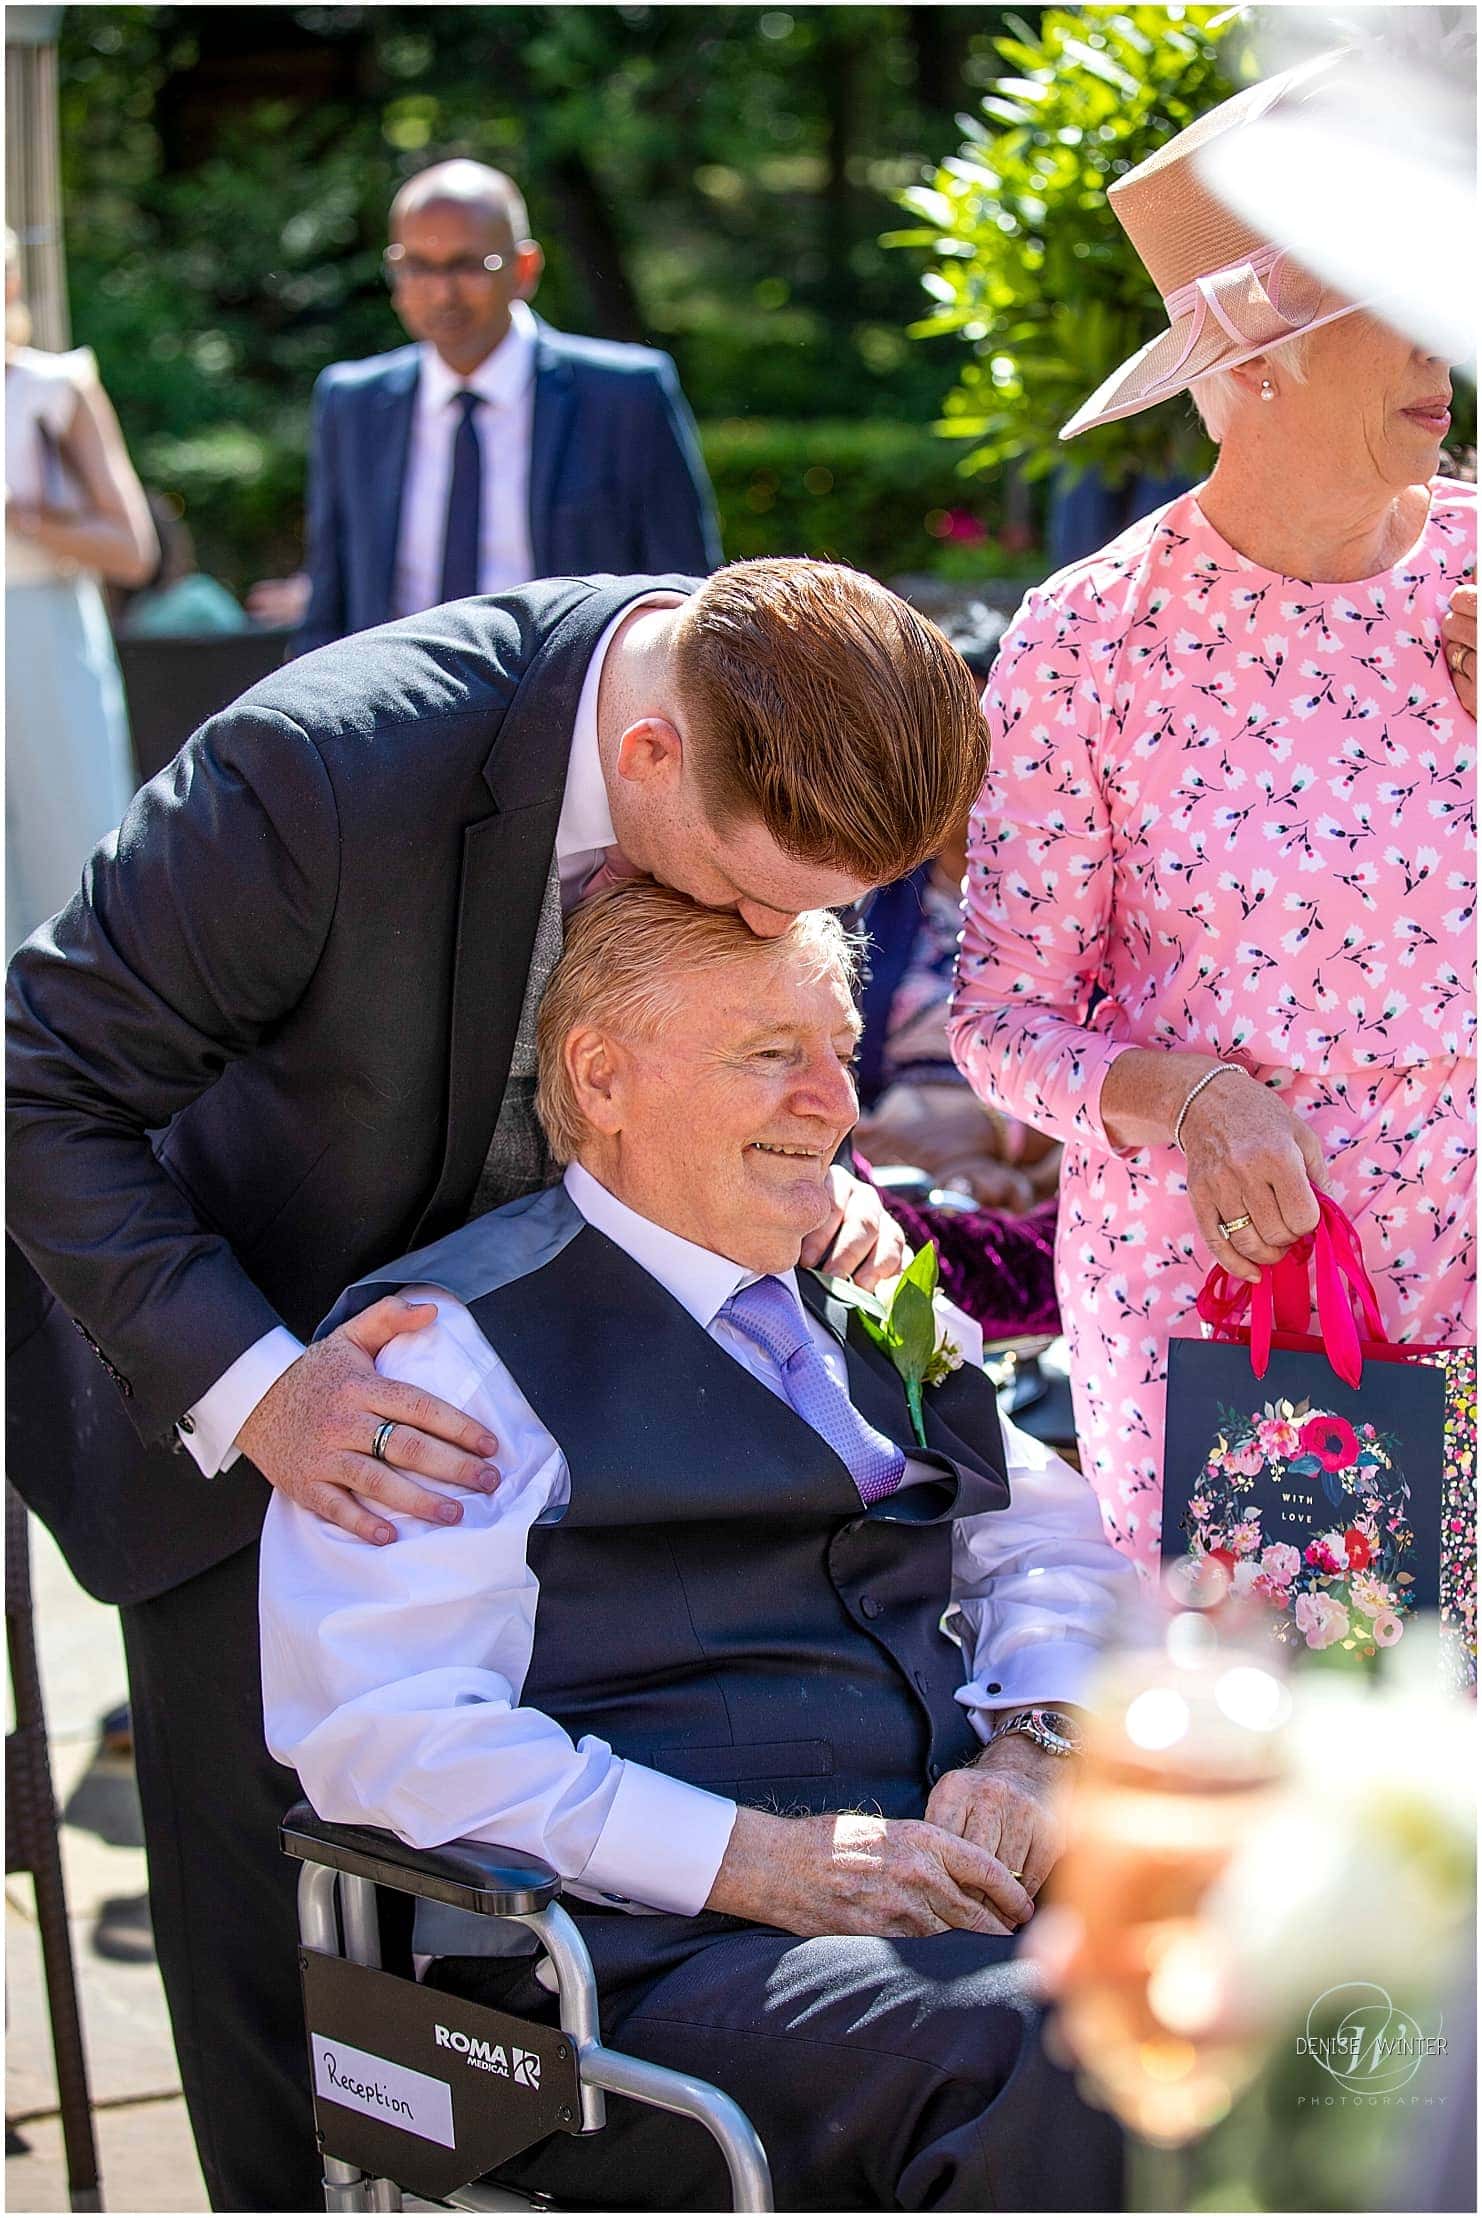 Father and son moment at a wedding at the Four Seasons hotel in Hampshire